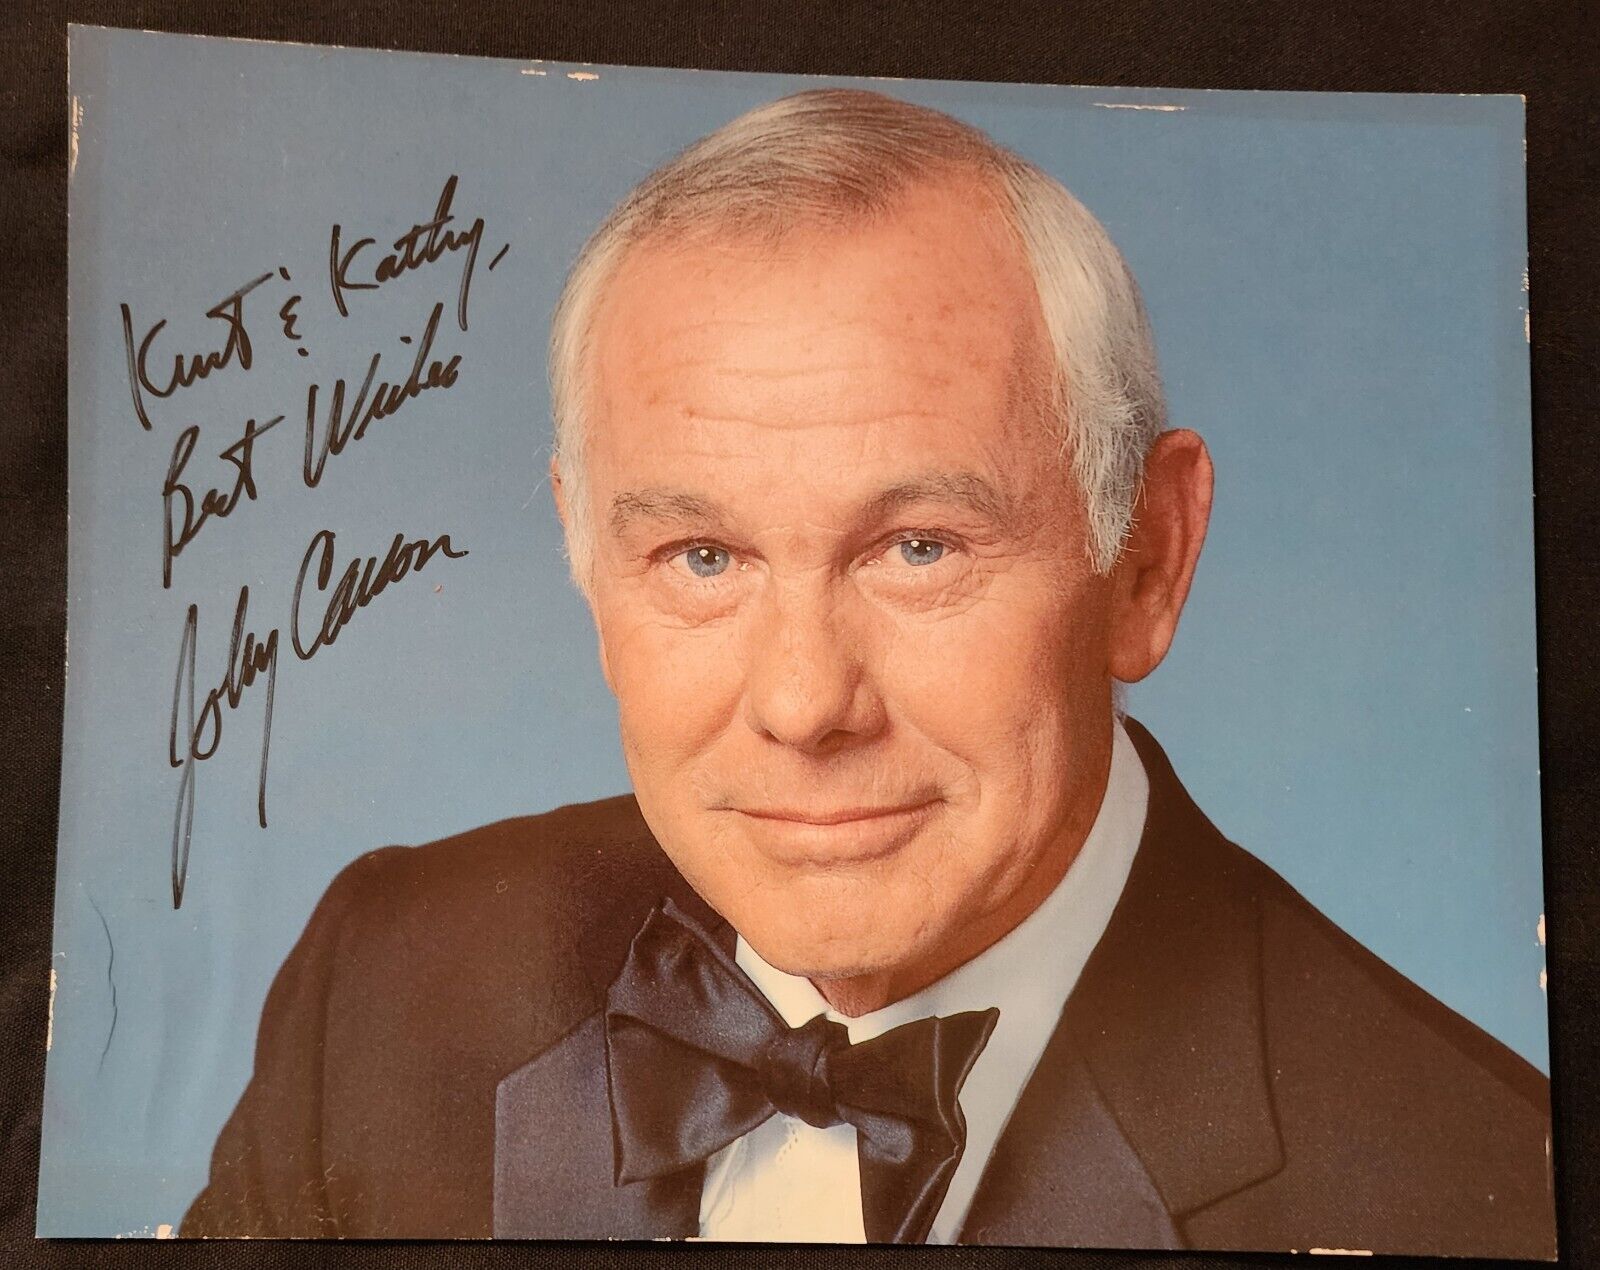 JOHNNY CARSON Photograph 8x10 – Autographed Signed Made Out To Kurt & Kathy COA